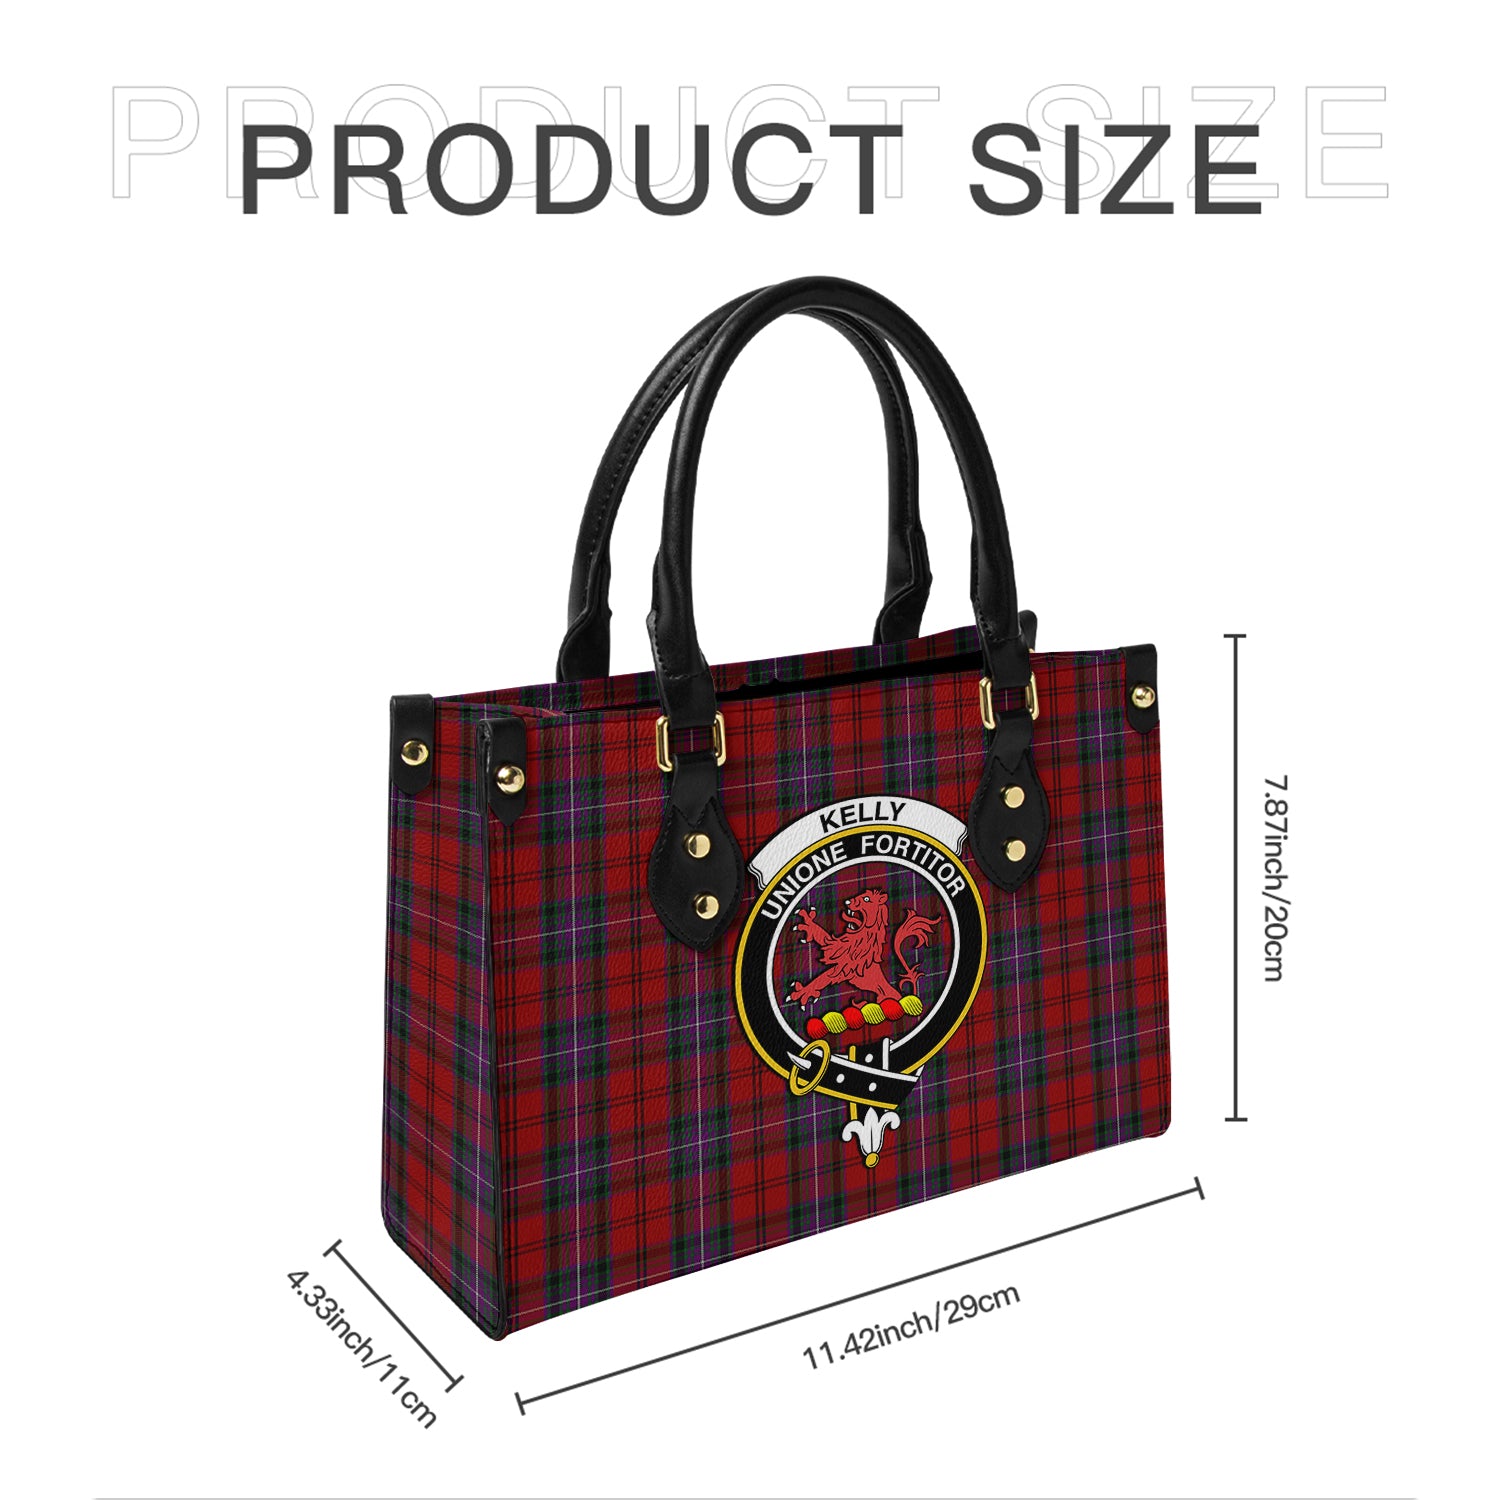 kelly-of-sleat-red-tartan-leather-bag-with-family-crest